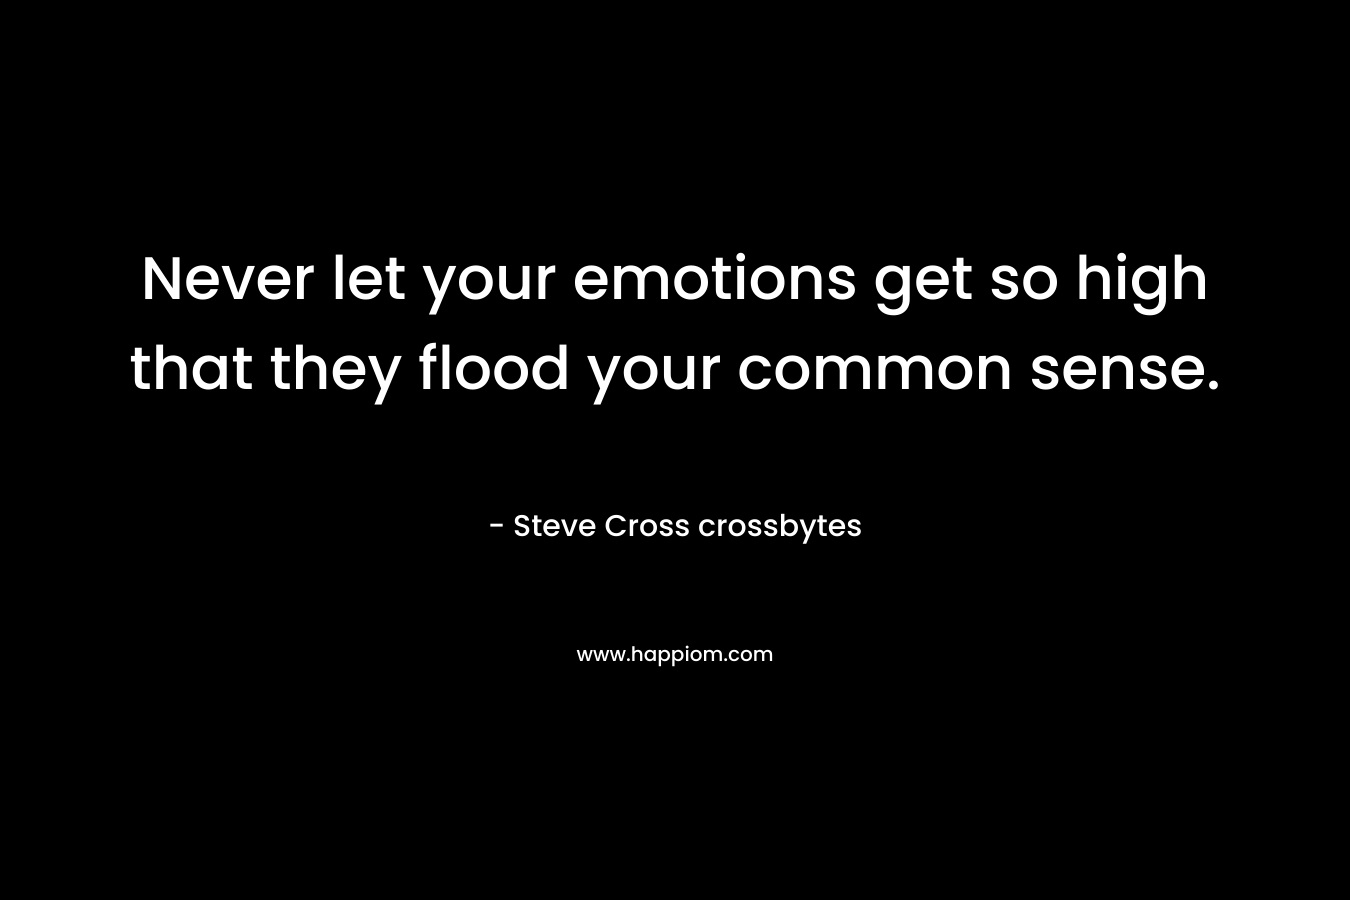 Never let your emotions get so high that they flood your common sense. – Steve Cross crossbytes